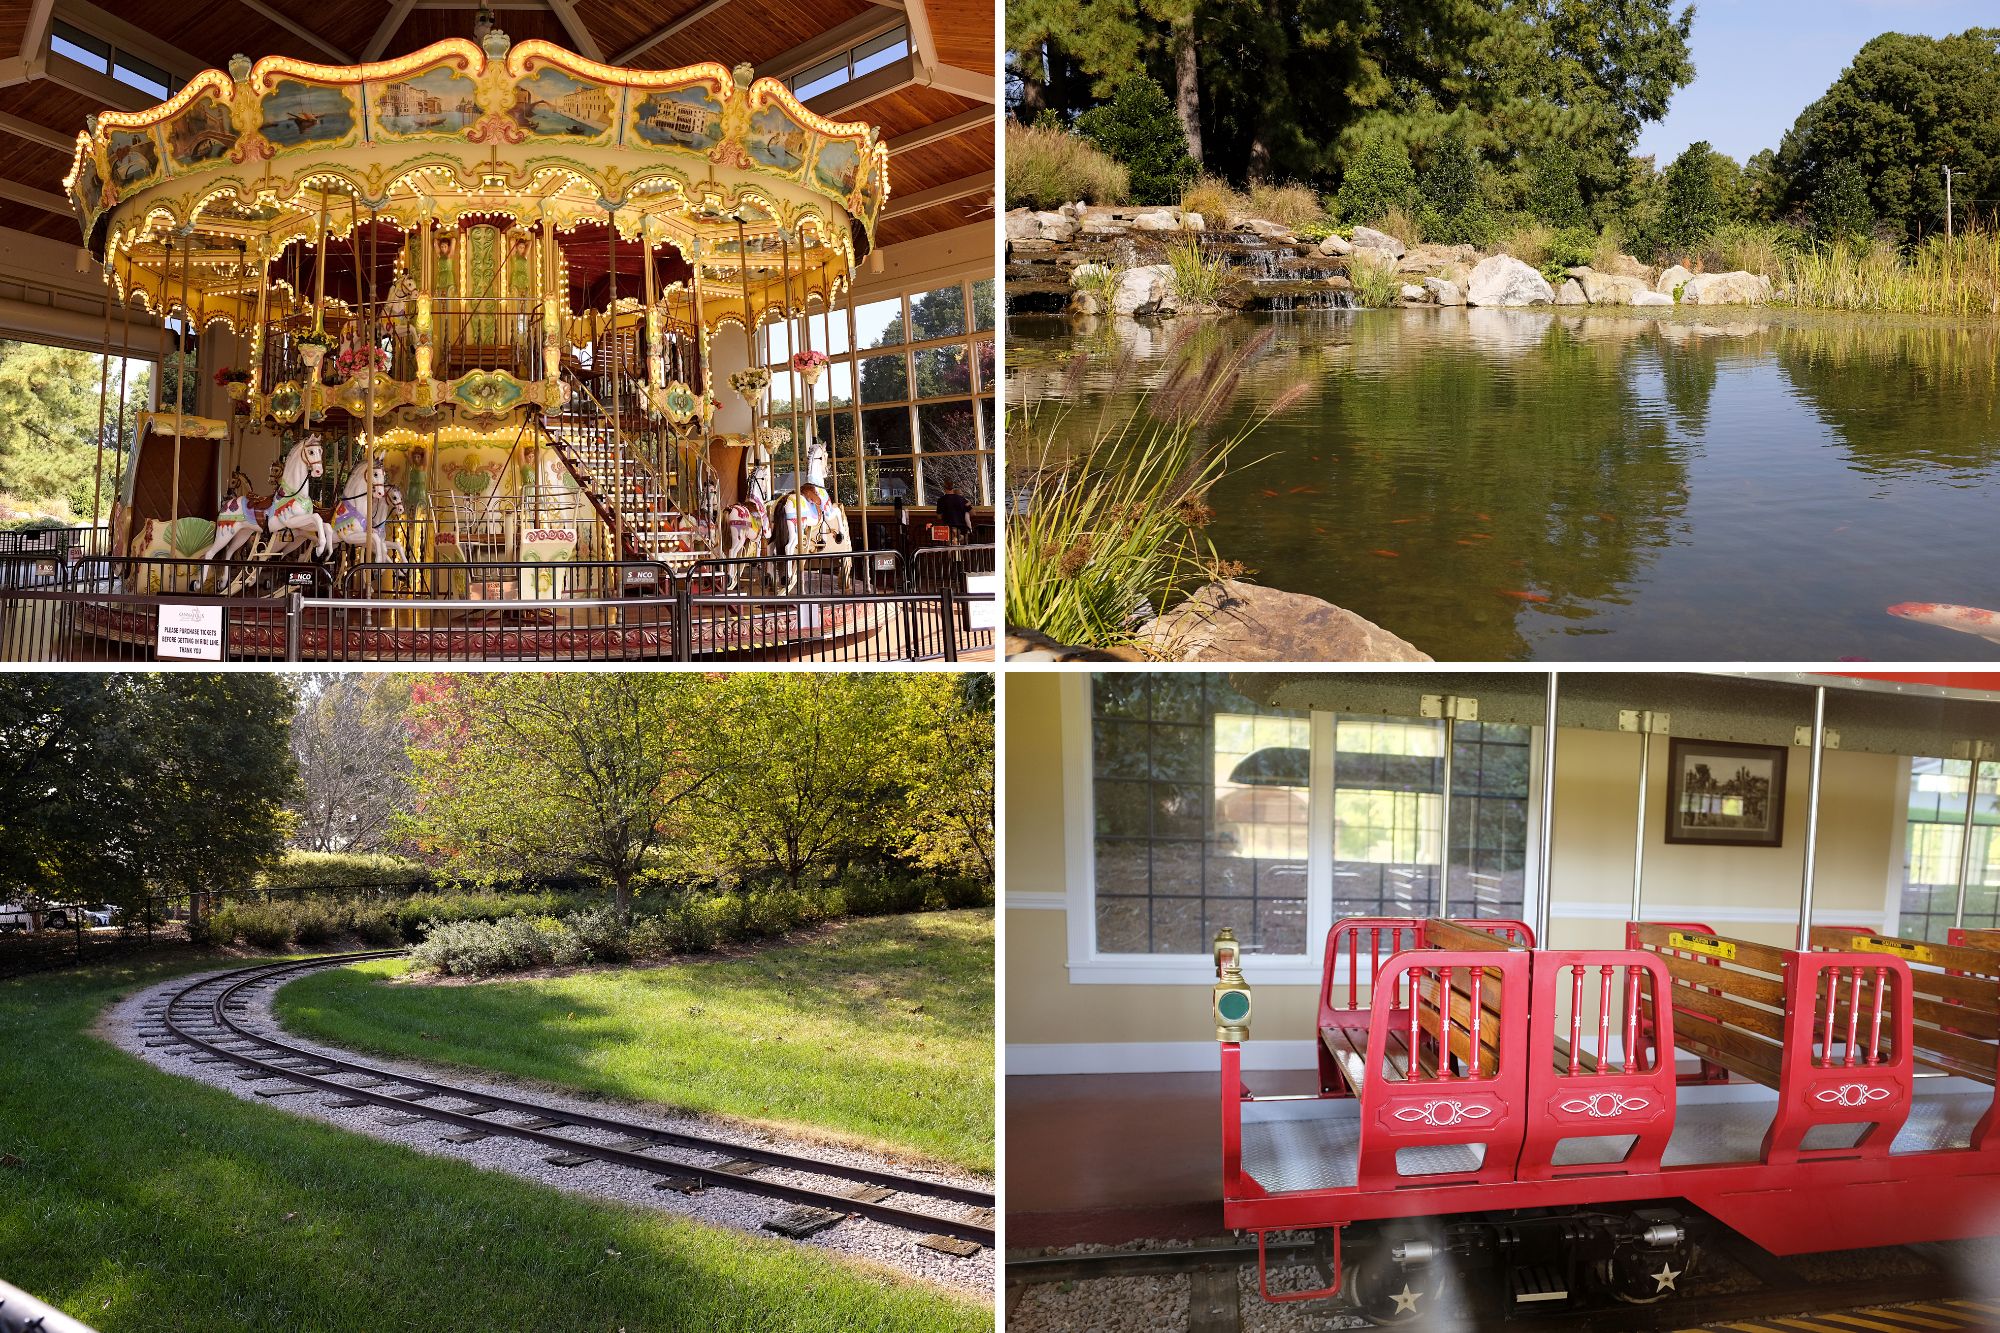 Collage of Village Park: carousel, pond, and train